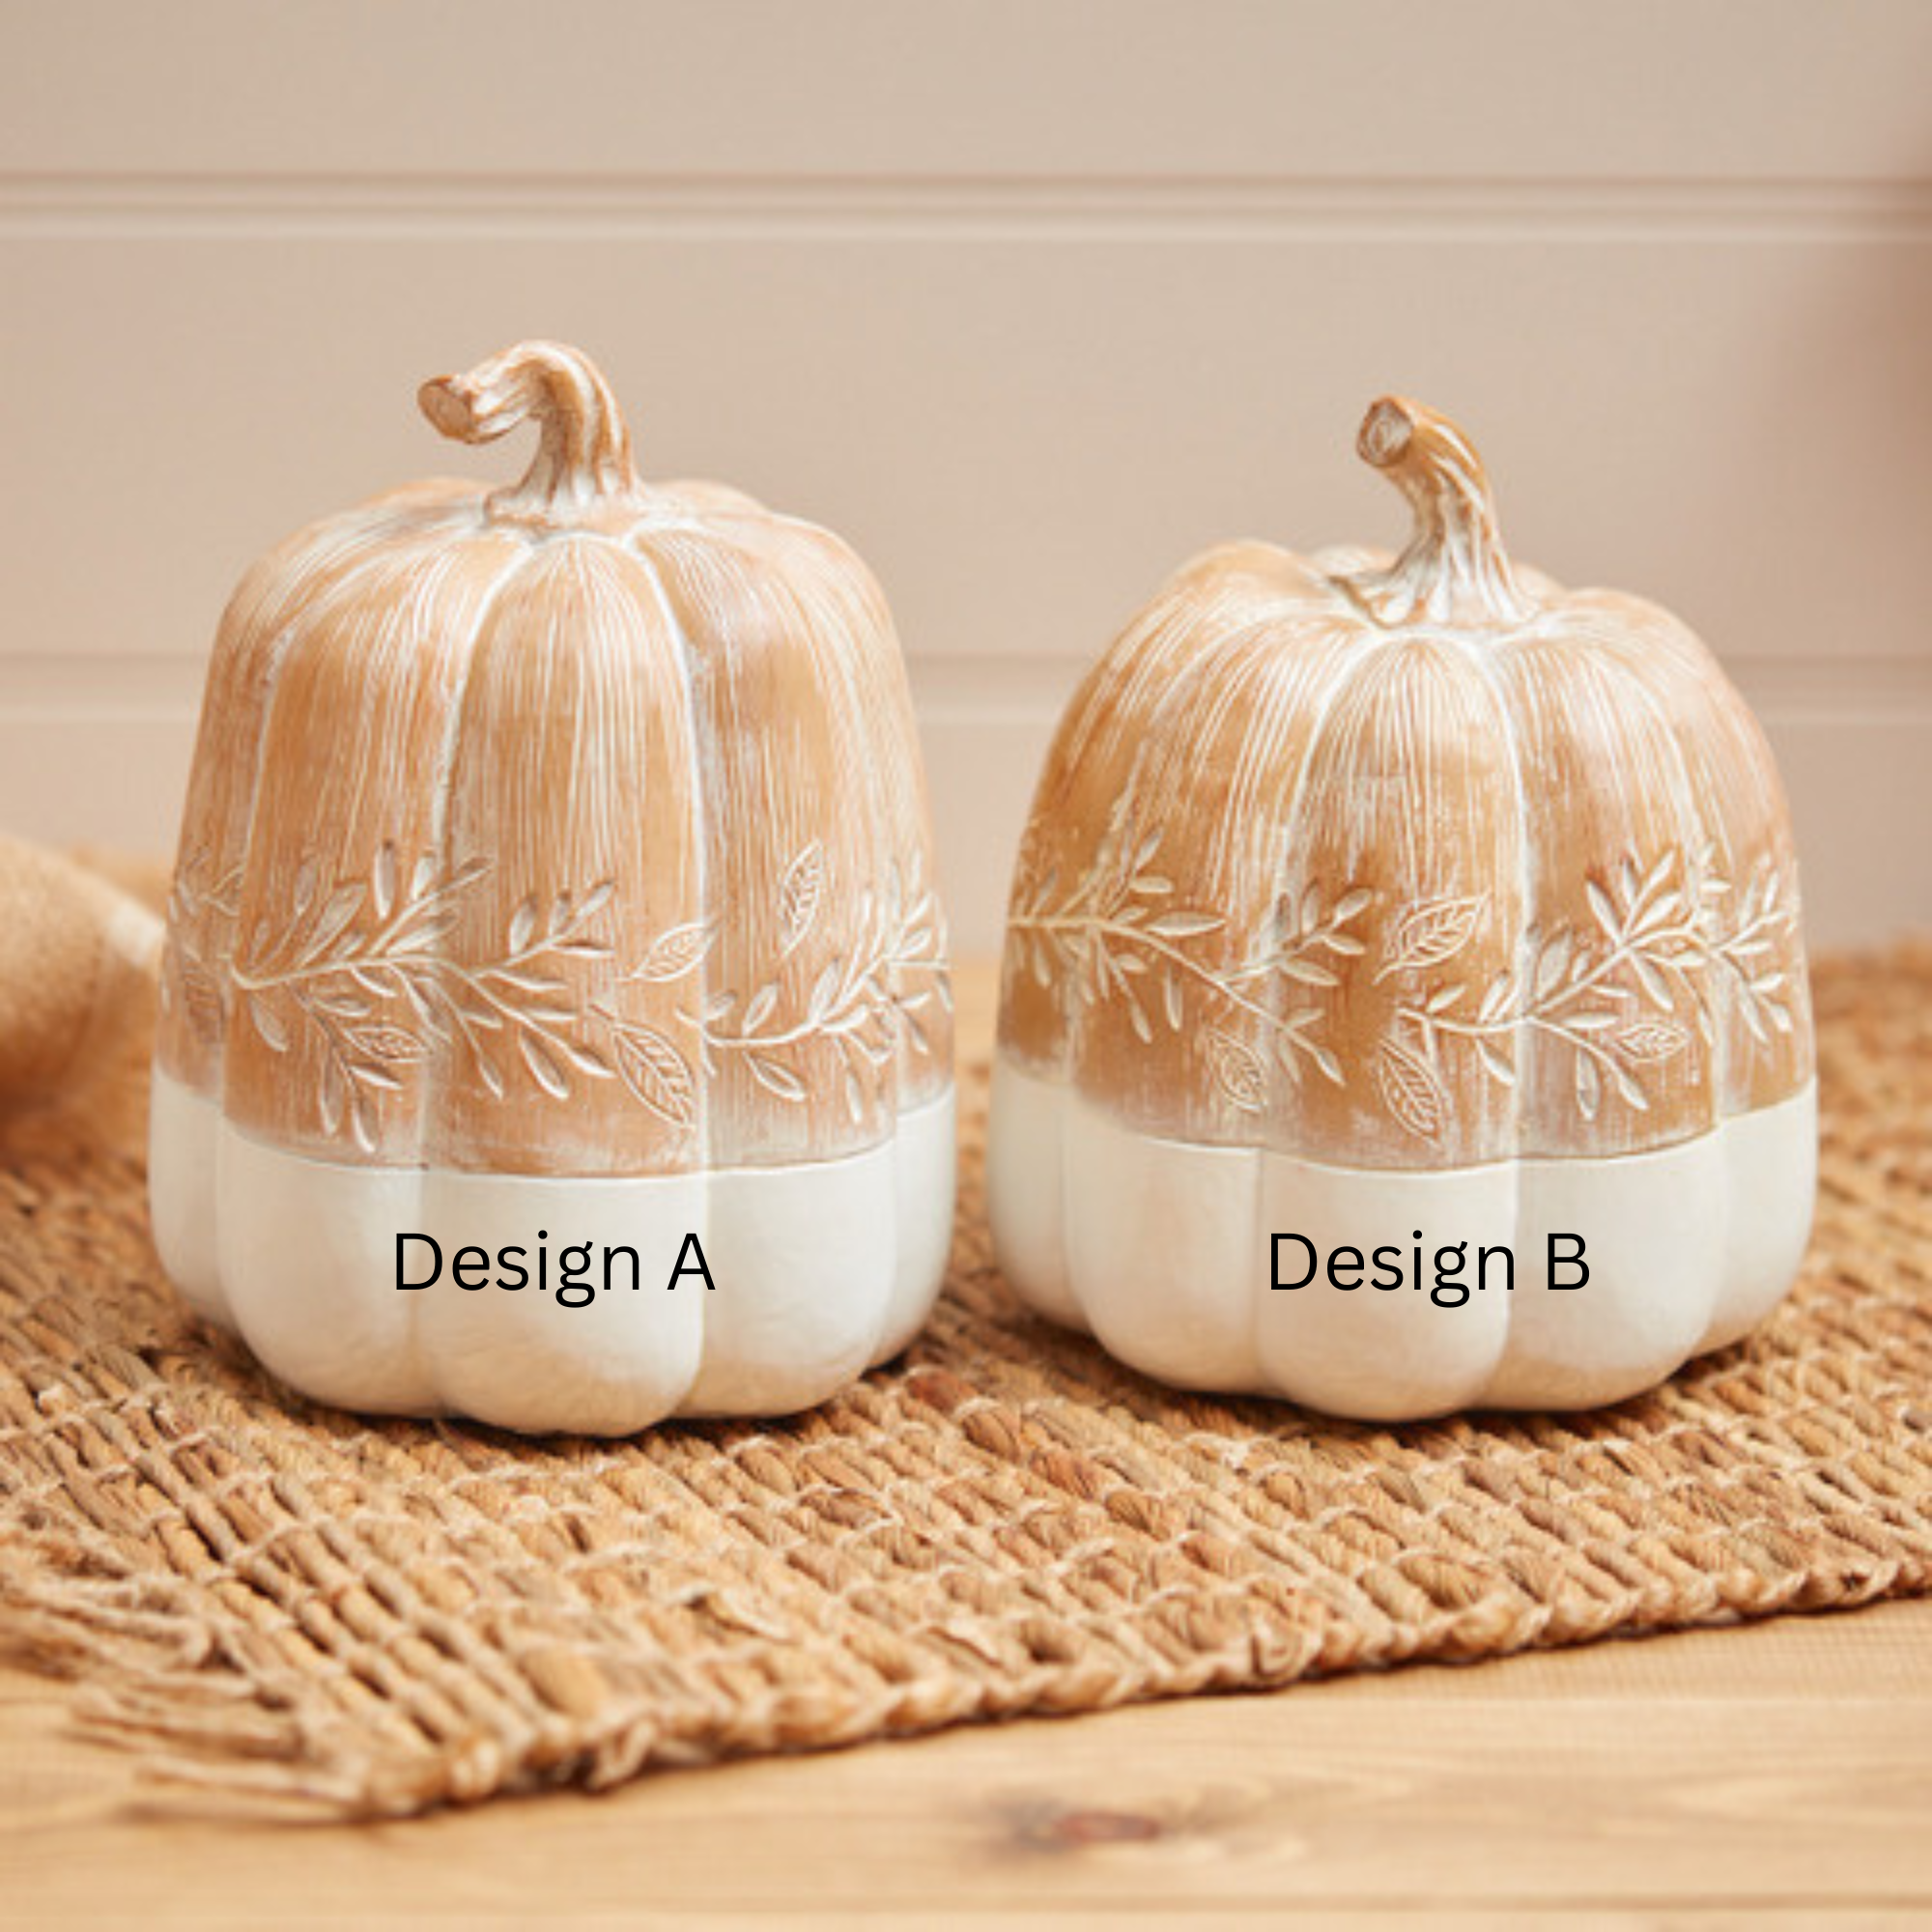 Decorative Neutral Toned Floral Carved Style Rustic Pumpkin - Sold Singly - Choose Preferred Design